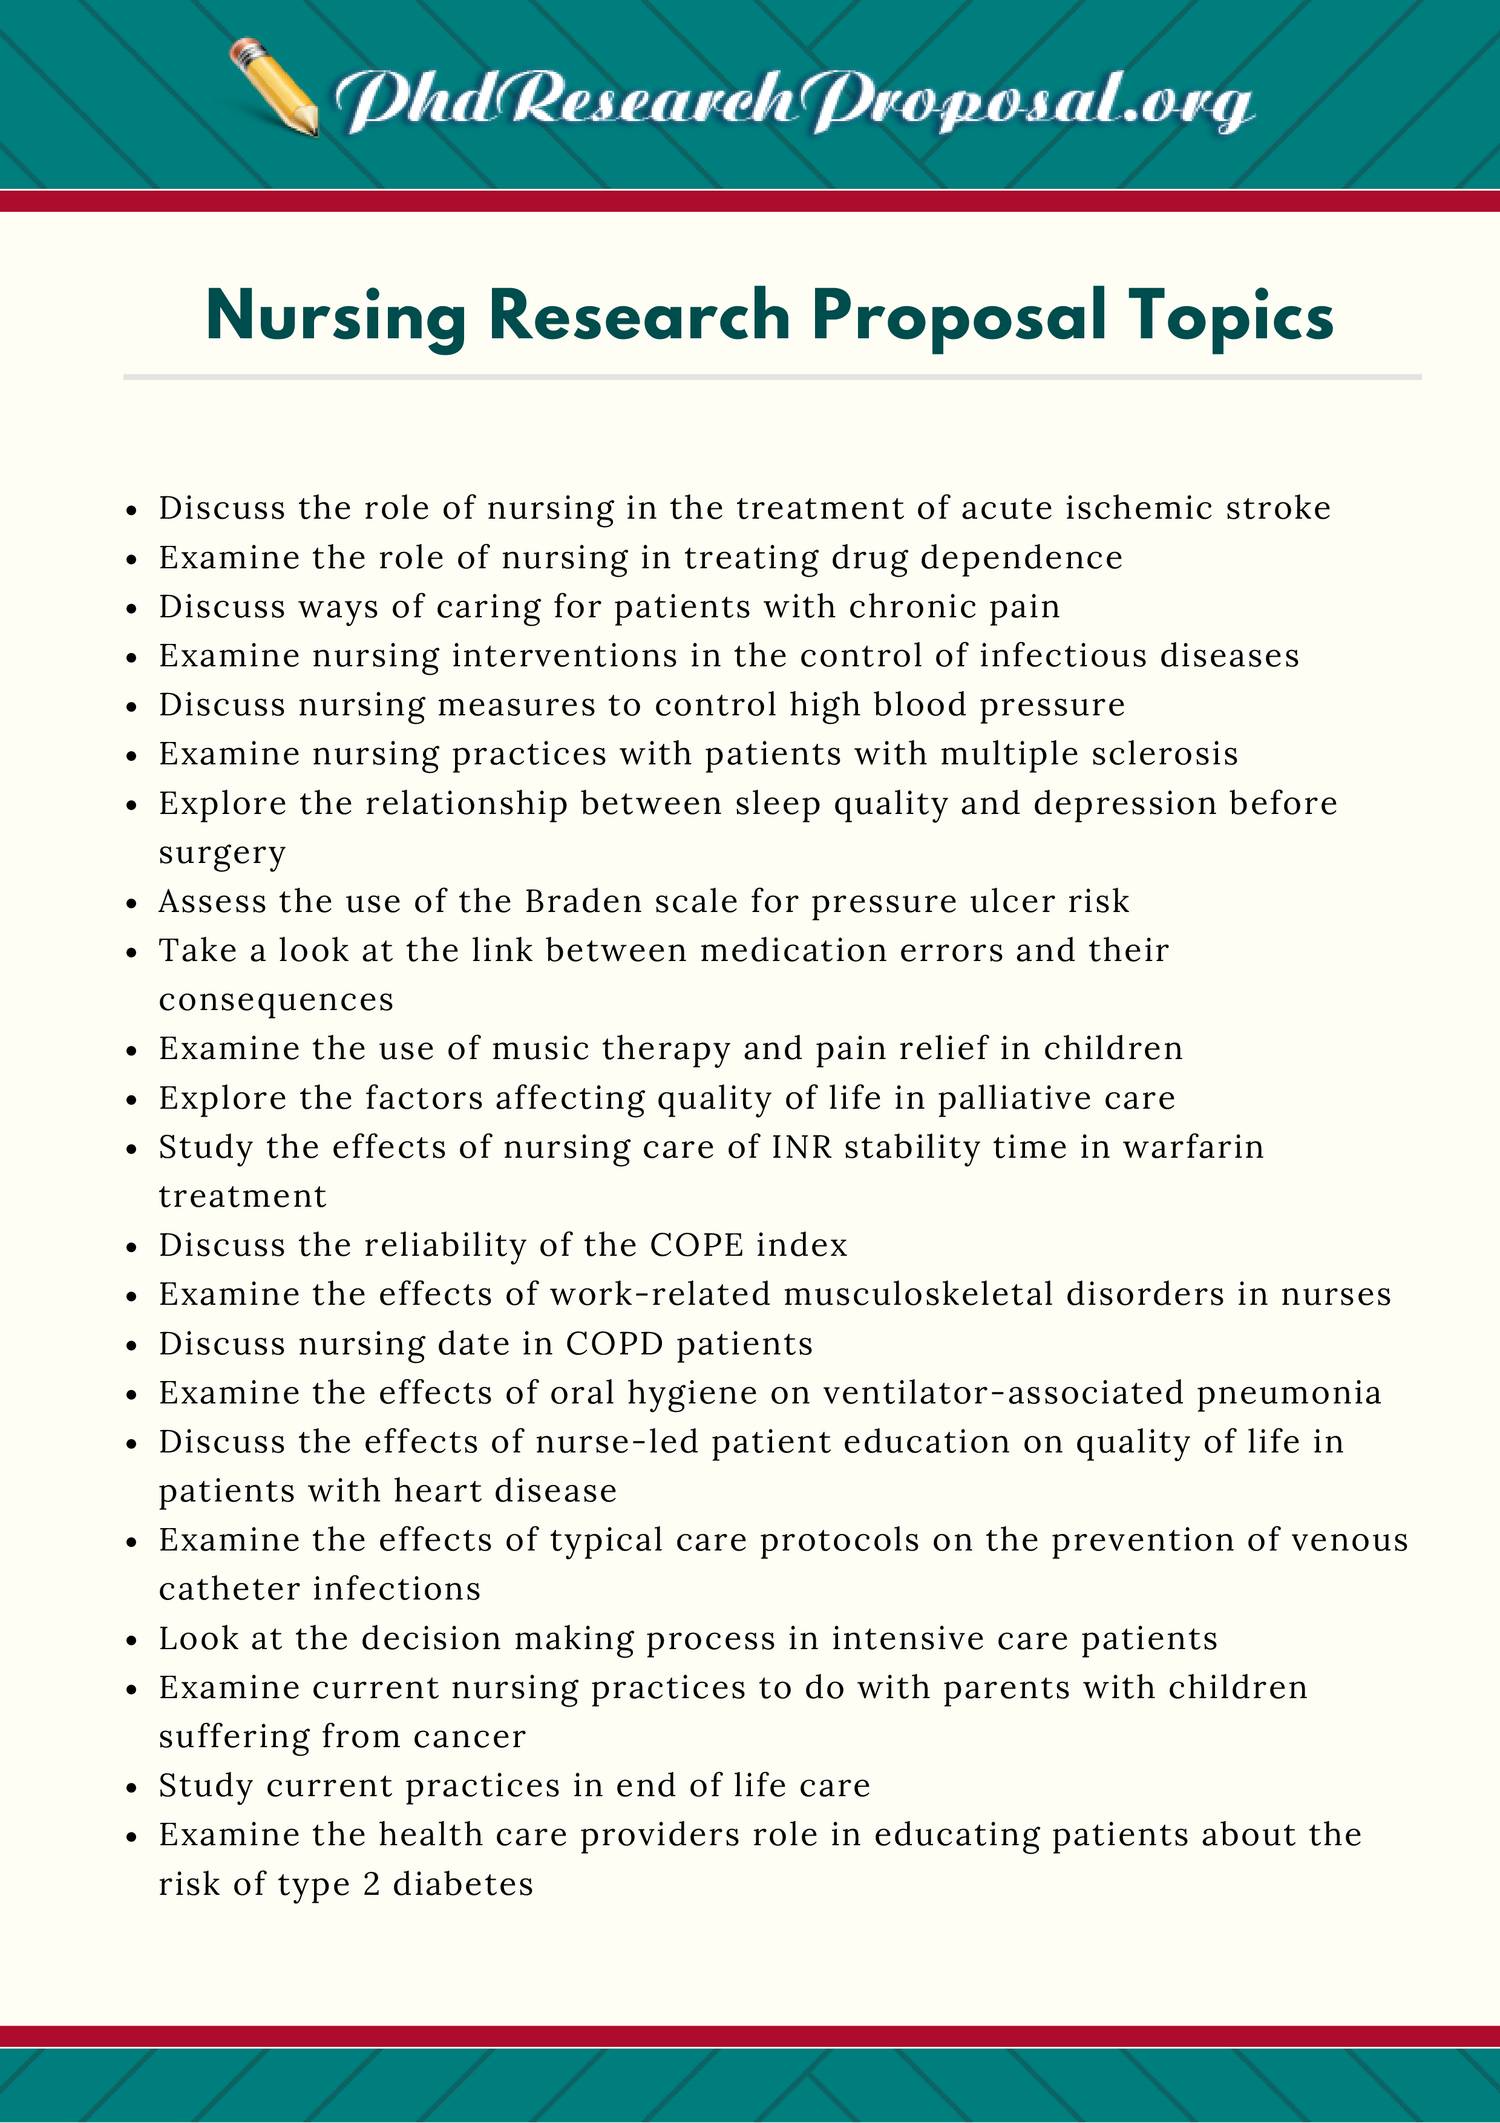 interesting topic for nursing research